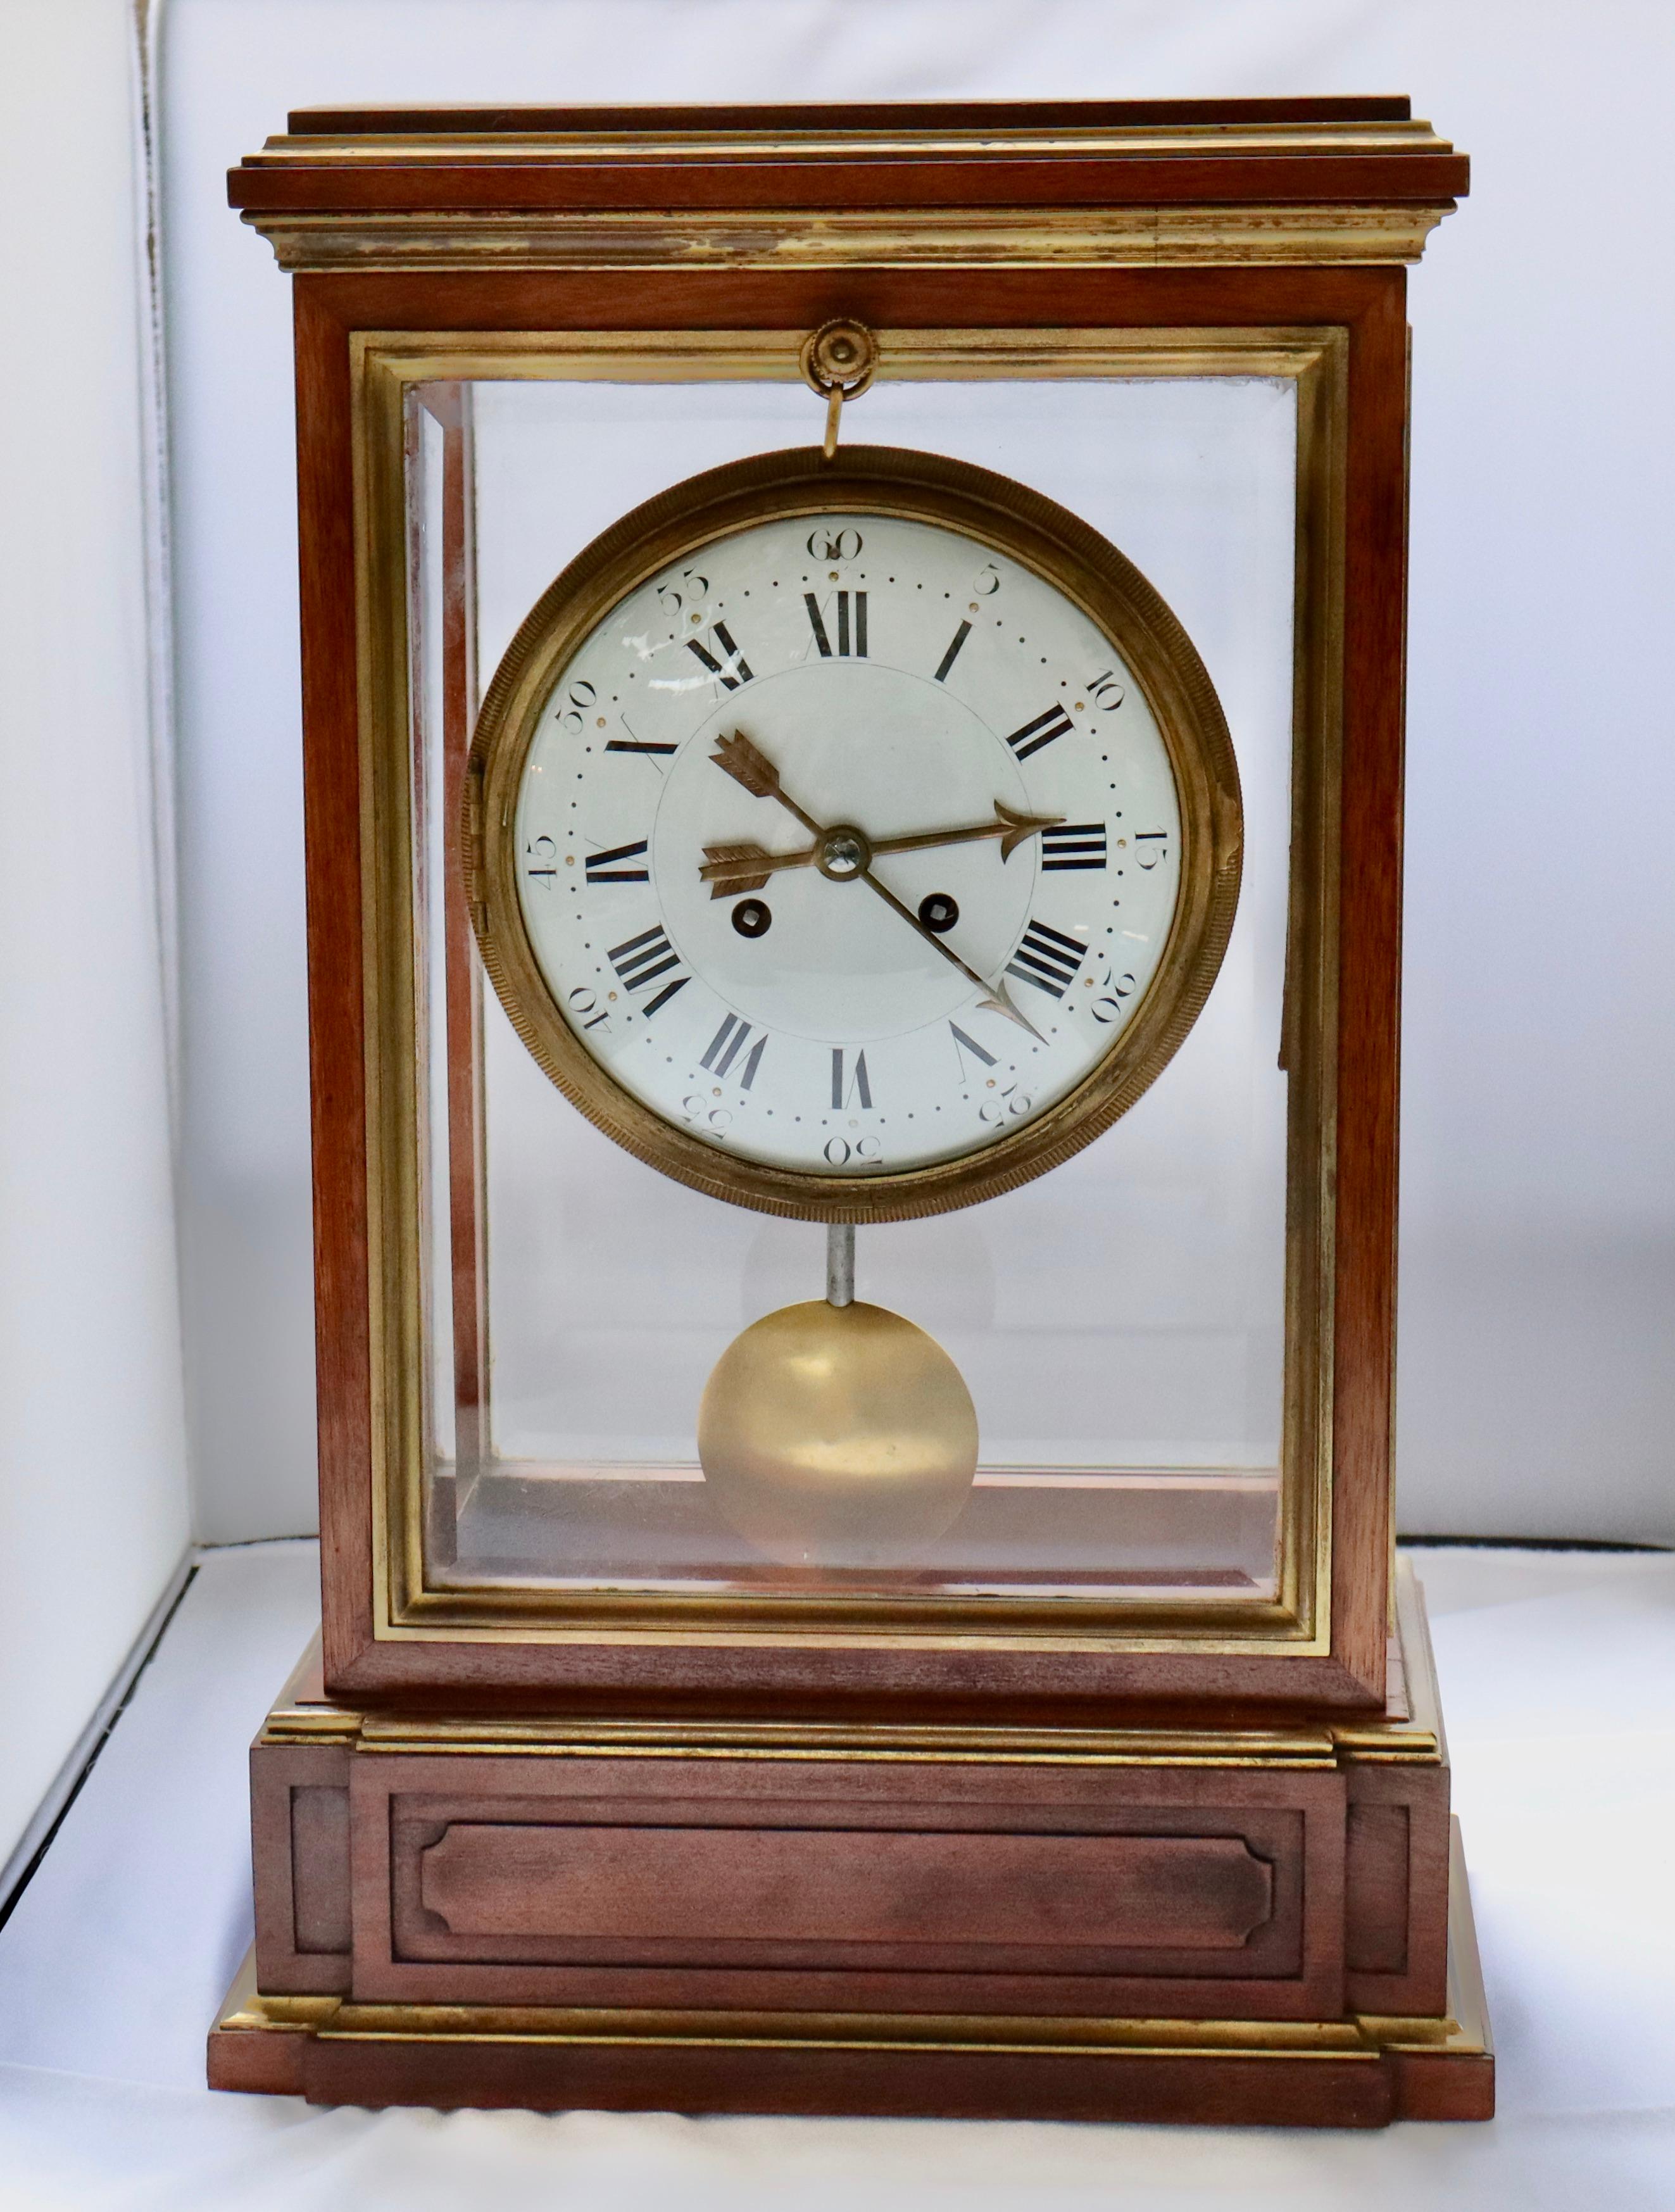 Impressive ormolu-mounted mantel clock regulator
Bevelled glass on each face
Enamelled dial
The movement signed Marnyhac and numbered 4285
With its original key and pendulum,
Circa 1860
In working conditions

Marnyhac et Cie was used as the